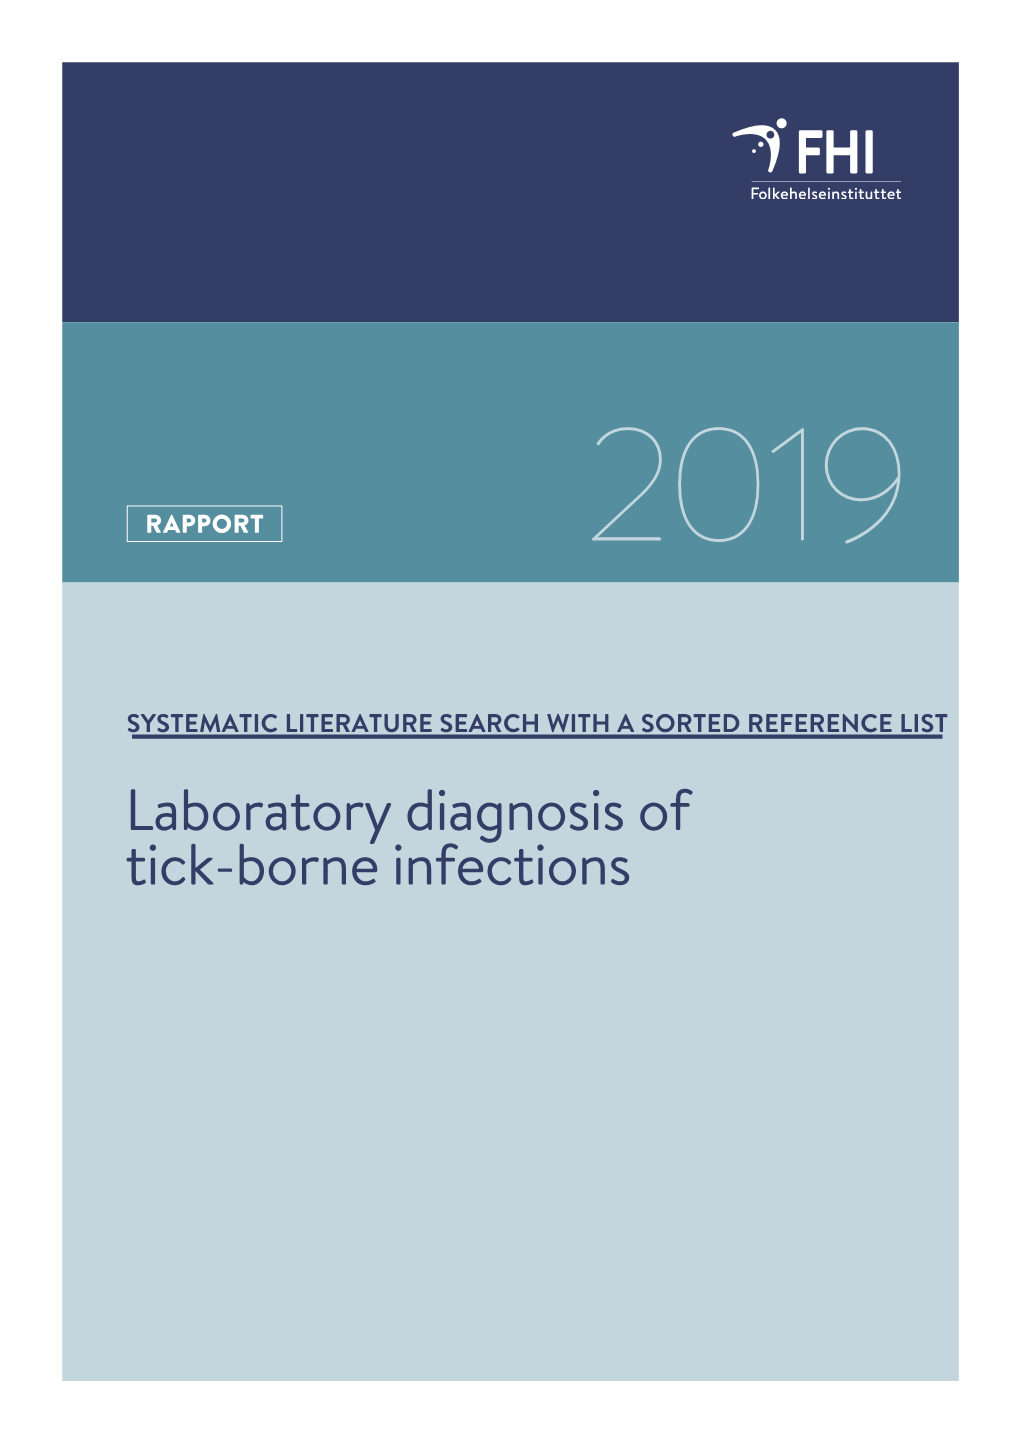 Laboratory Diagnosis of Tick-Borne Infections: a Systematic Literature Search with a Sorted Reference List